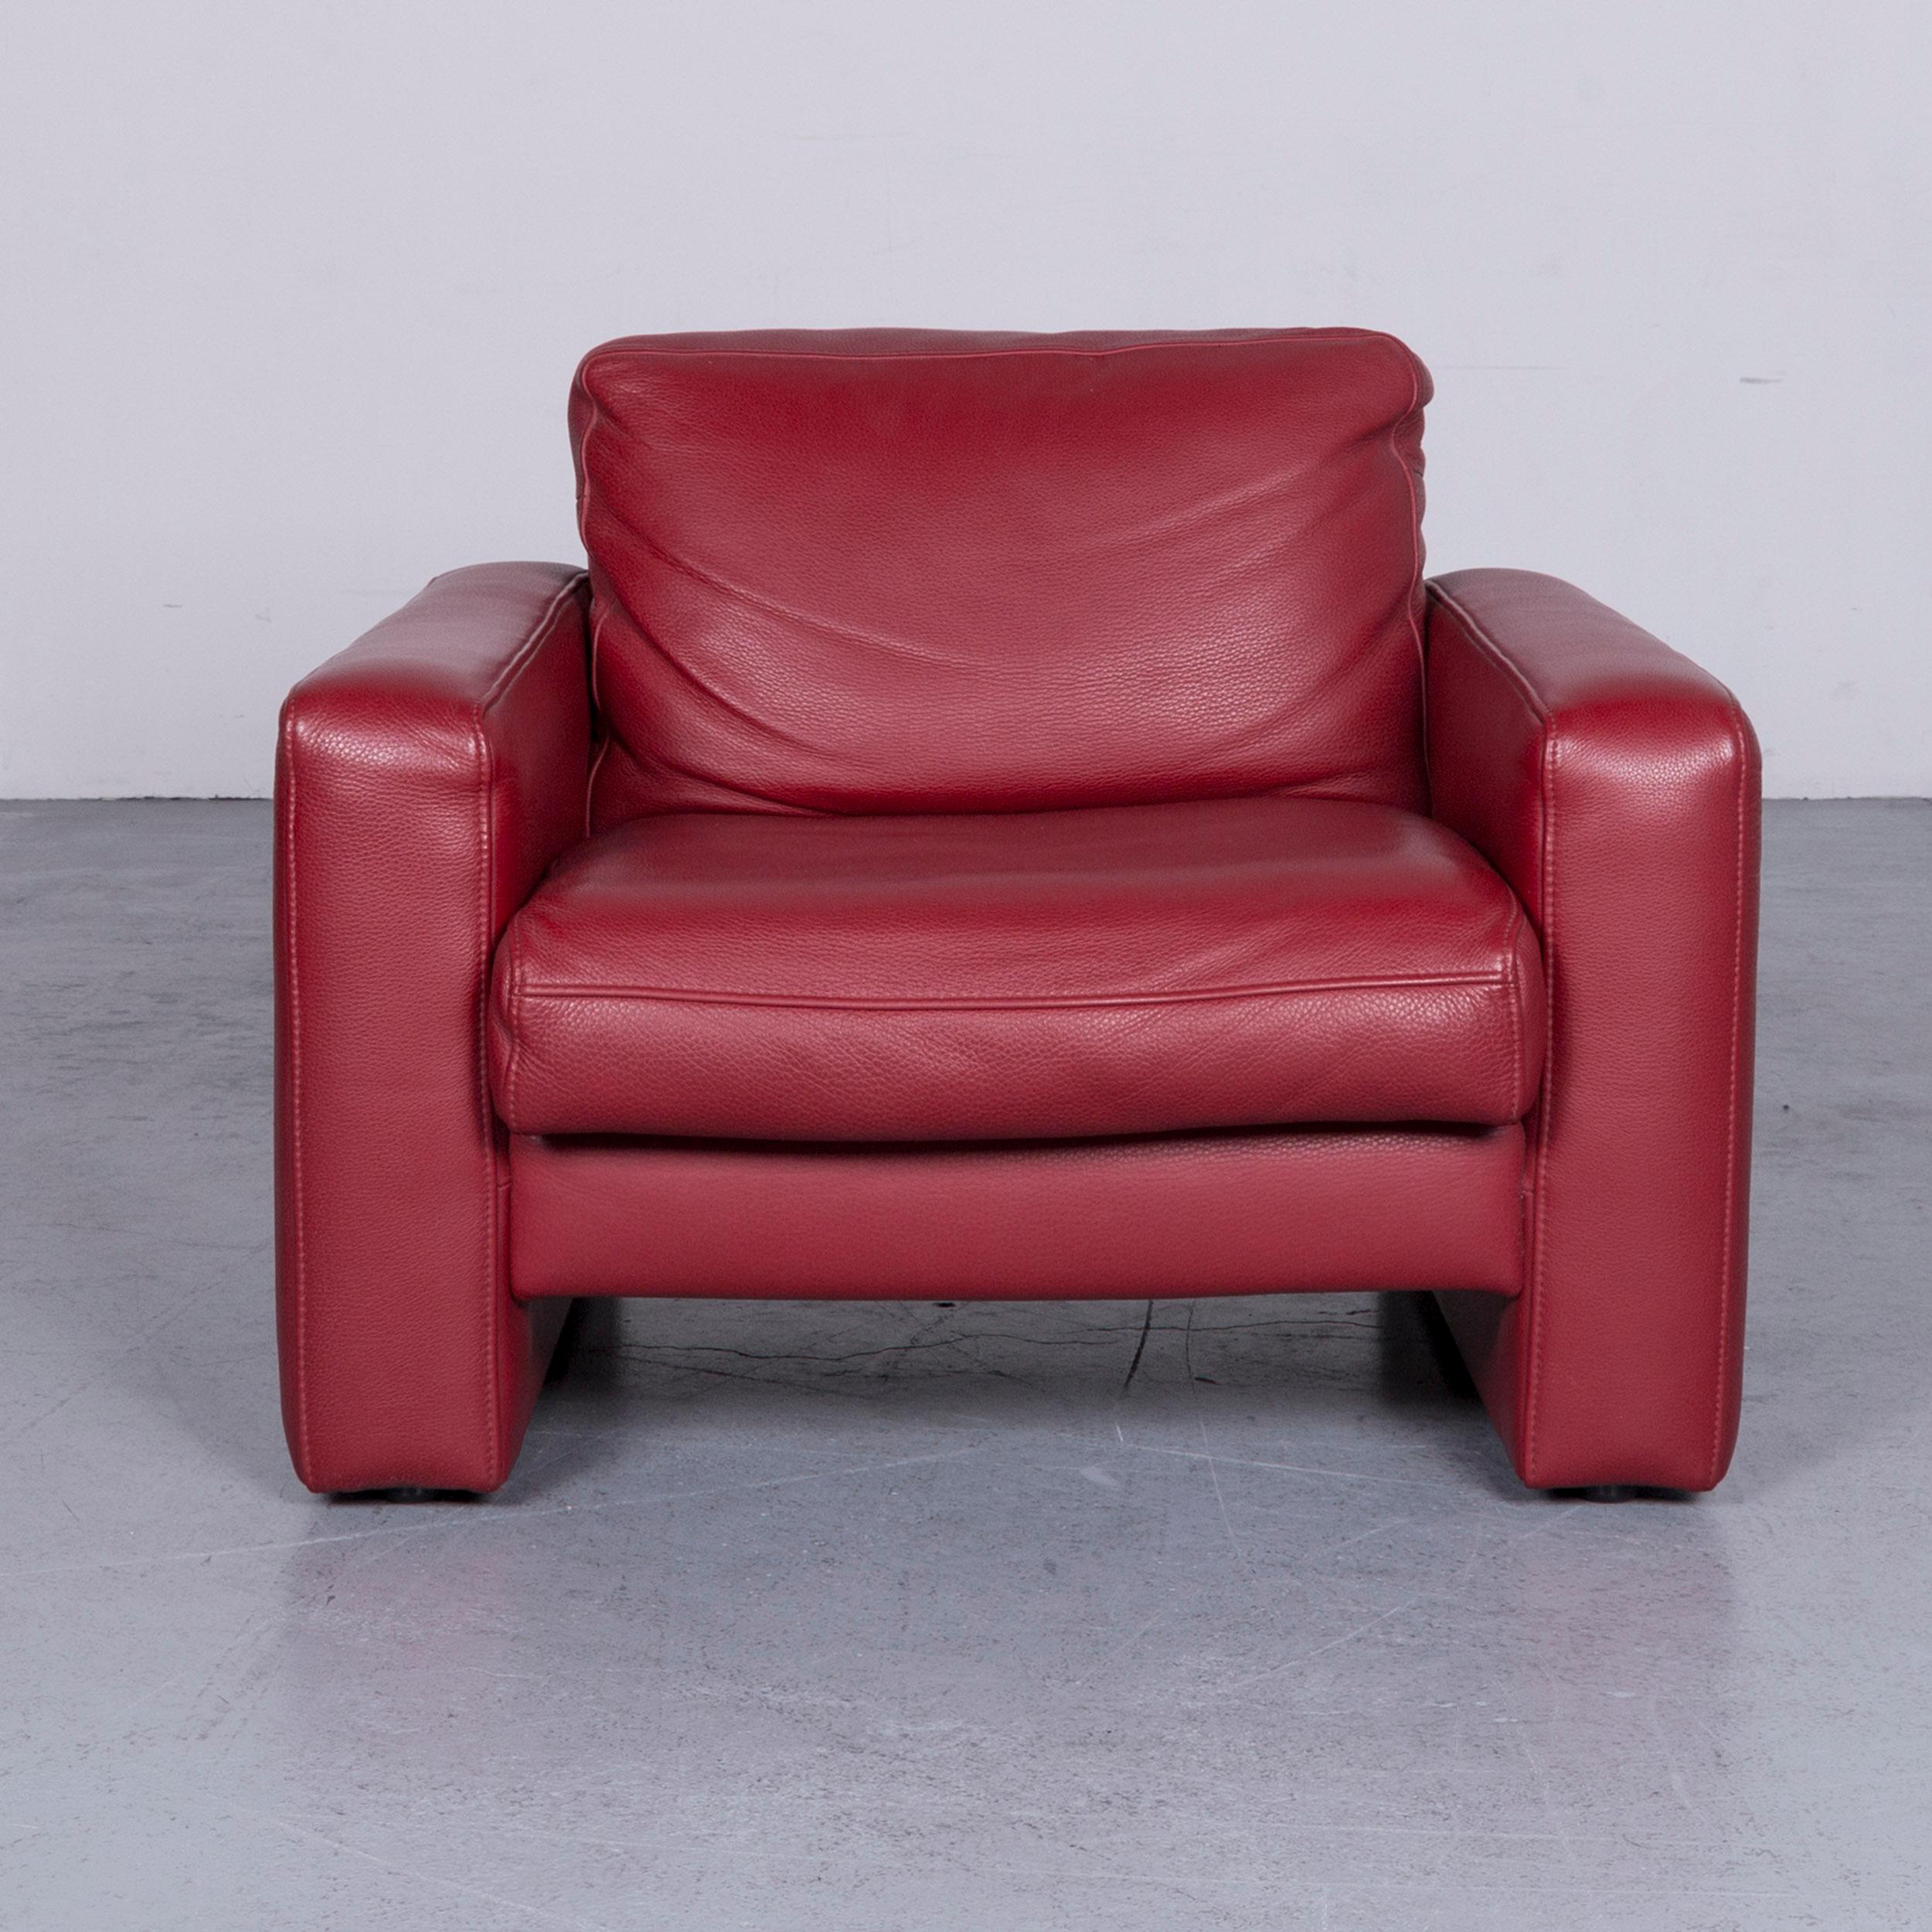 Red colored designer leather armchair in a minimalistic and modern design, made for pure comfort.